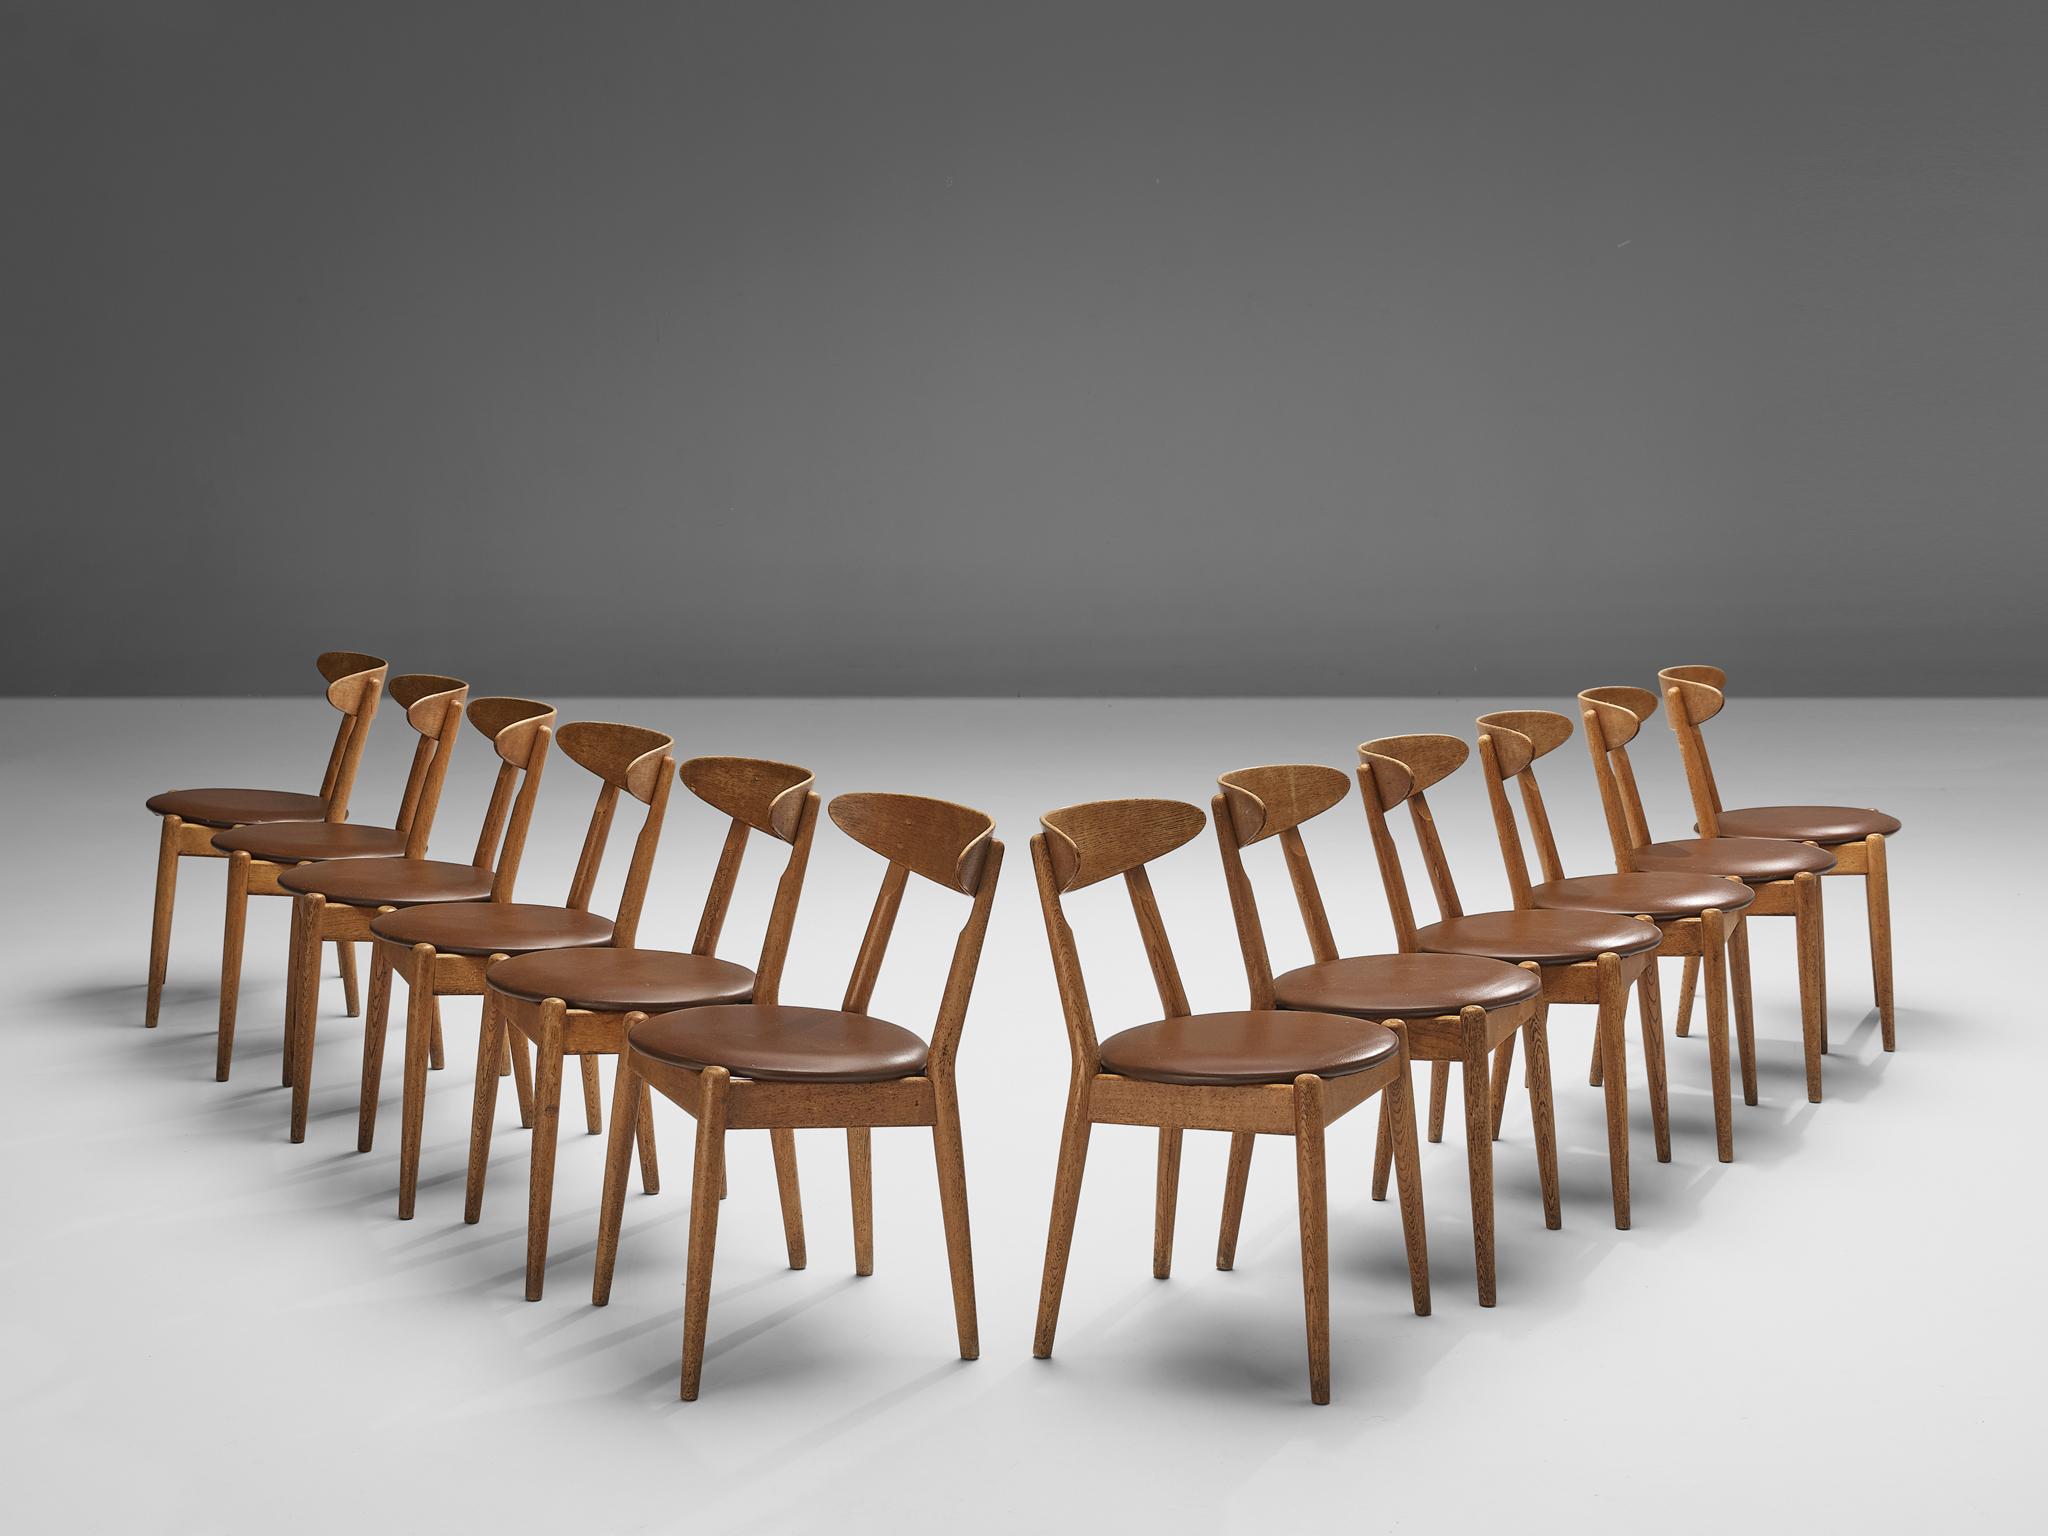 Jørgen Bo and Vilhelm Wohlert for P. Jeppesens Møbelfabrik, set of twelve ‘Louisiana’ dining chairs, oak, leather, Denmark, 1958.

The ‘Louisiana’ chair was initially created for the Louisiana Museum of Modern Art in Humlebæk (Denmark) which Danish